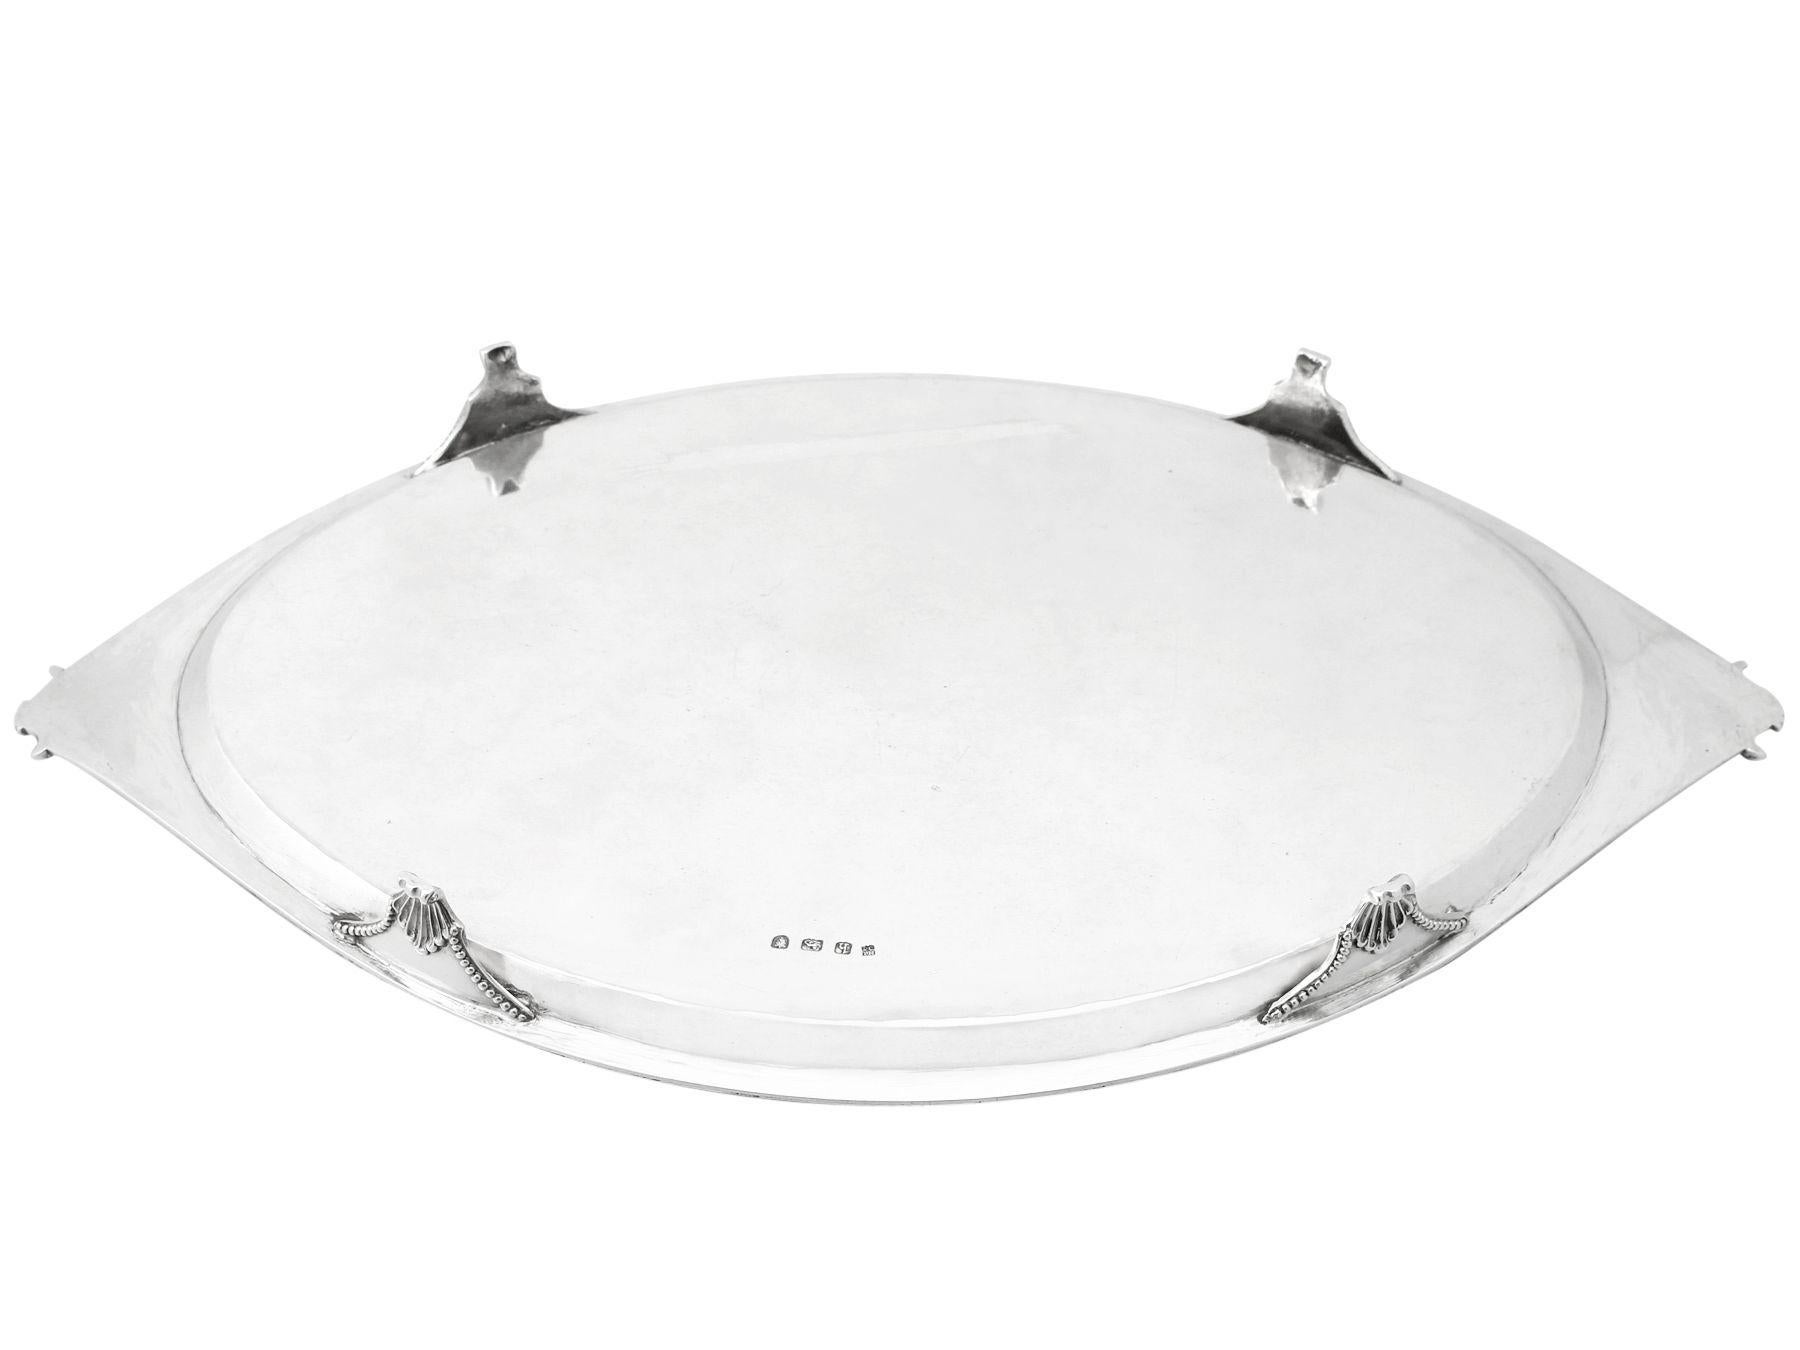 Antique George III 1780s Sterling Silver Salver by John Crouch & Thomas Hannam For Sale 1